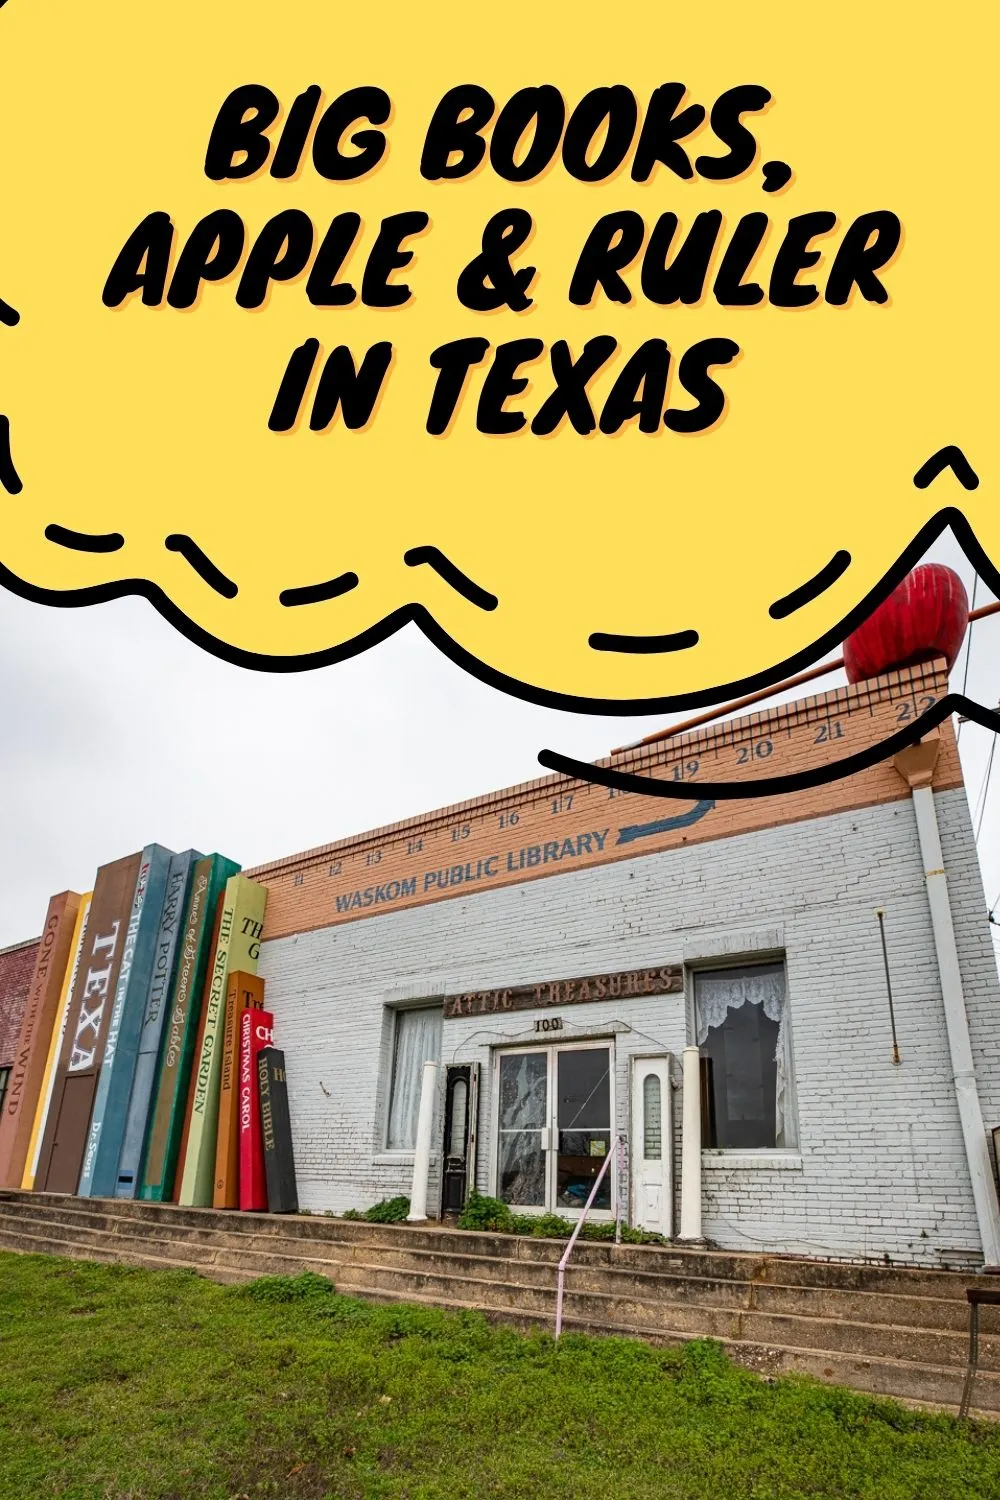 You're definitely going to want to CHECK OUT this roadside attraction! Find the big books, apple, ruler, and more at the Waskom Public Library in Waskom, Texas. Look for this weird roadside attraction on your next Texas road trip. #RoadTrip #RoadsideAttraction #RoadTrips #RoadsideAttractions #TexasRoadTrip #TexasRoadsideAttraction